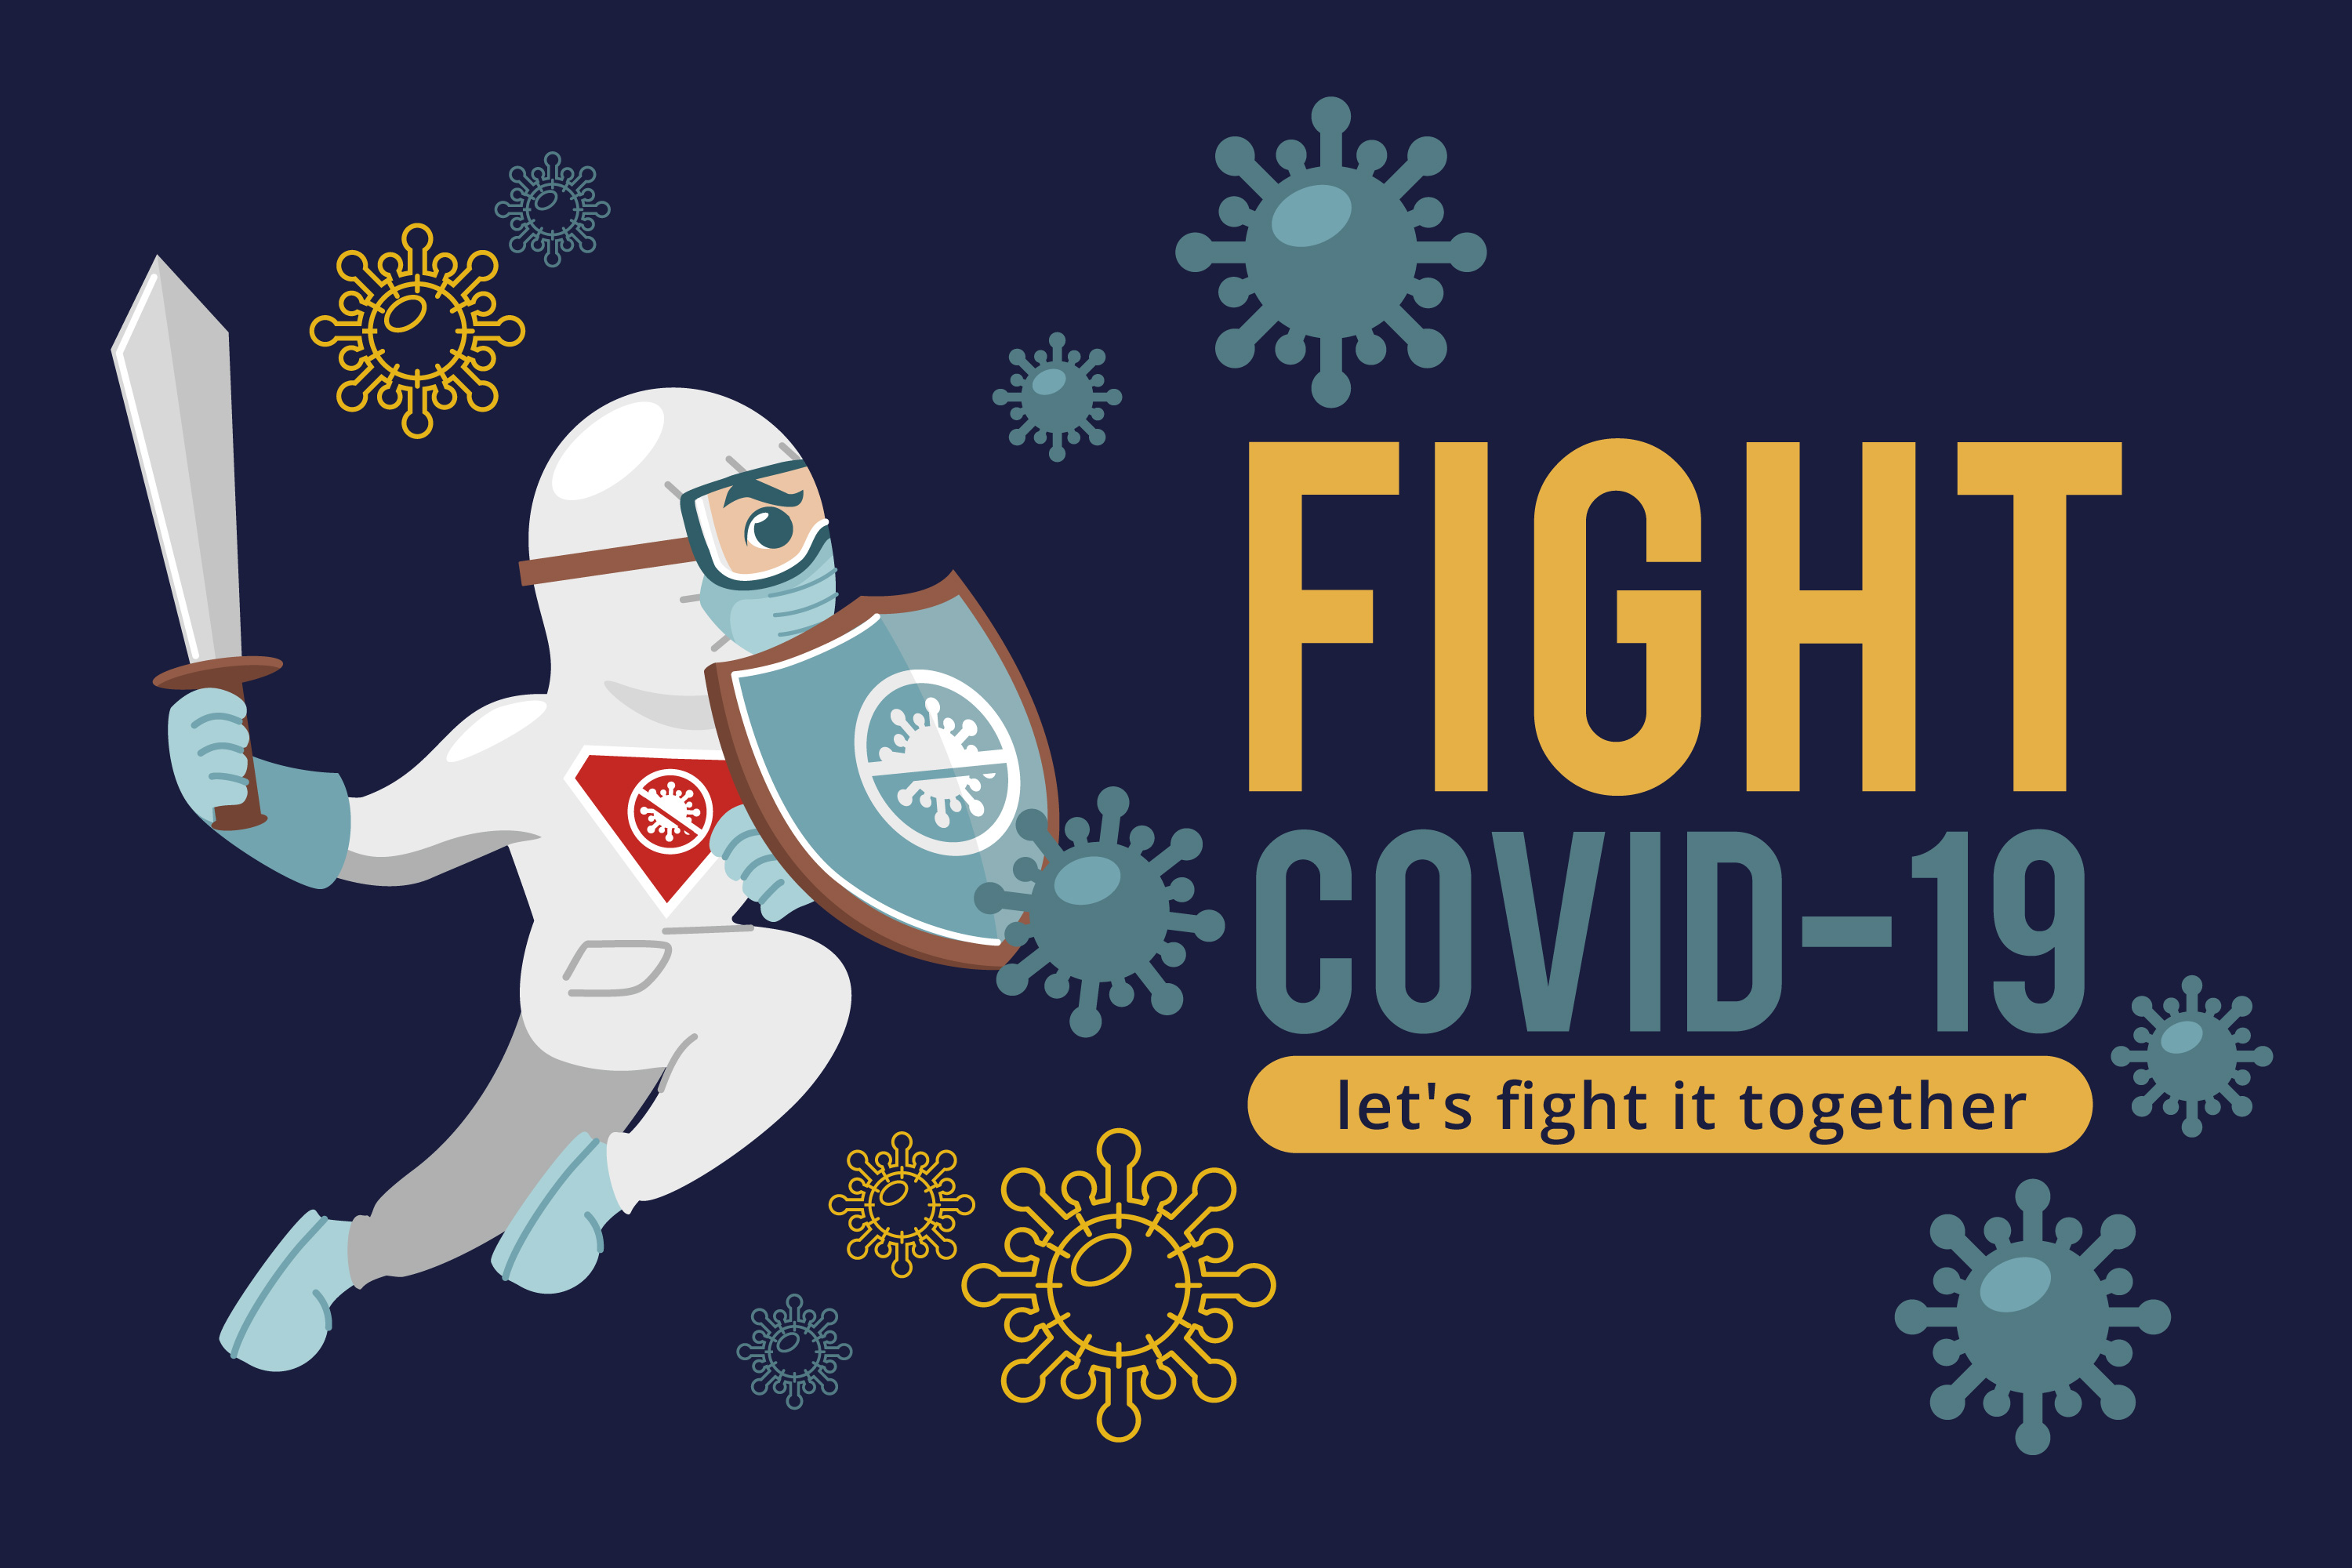 Let's fight COVID-19 together